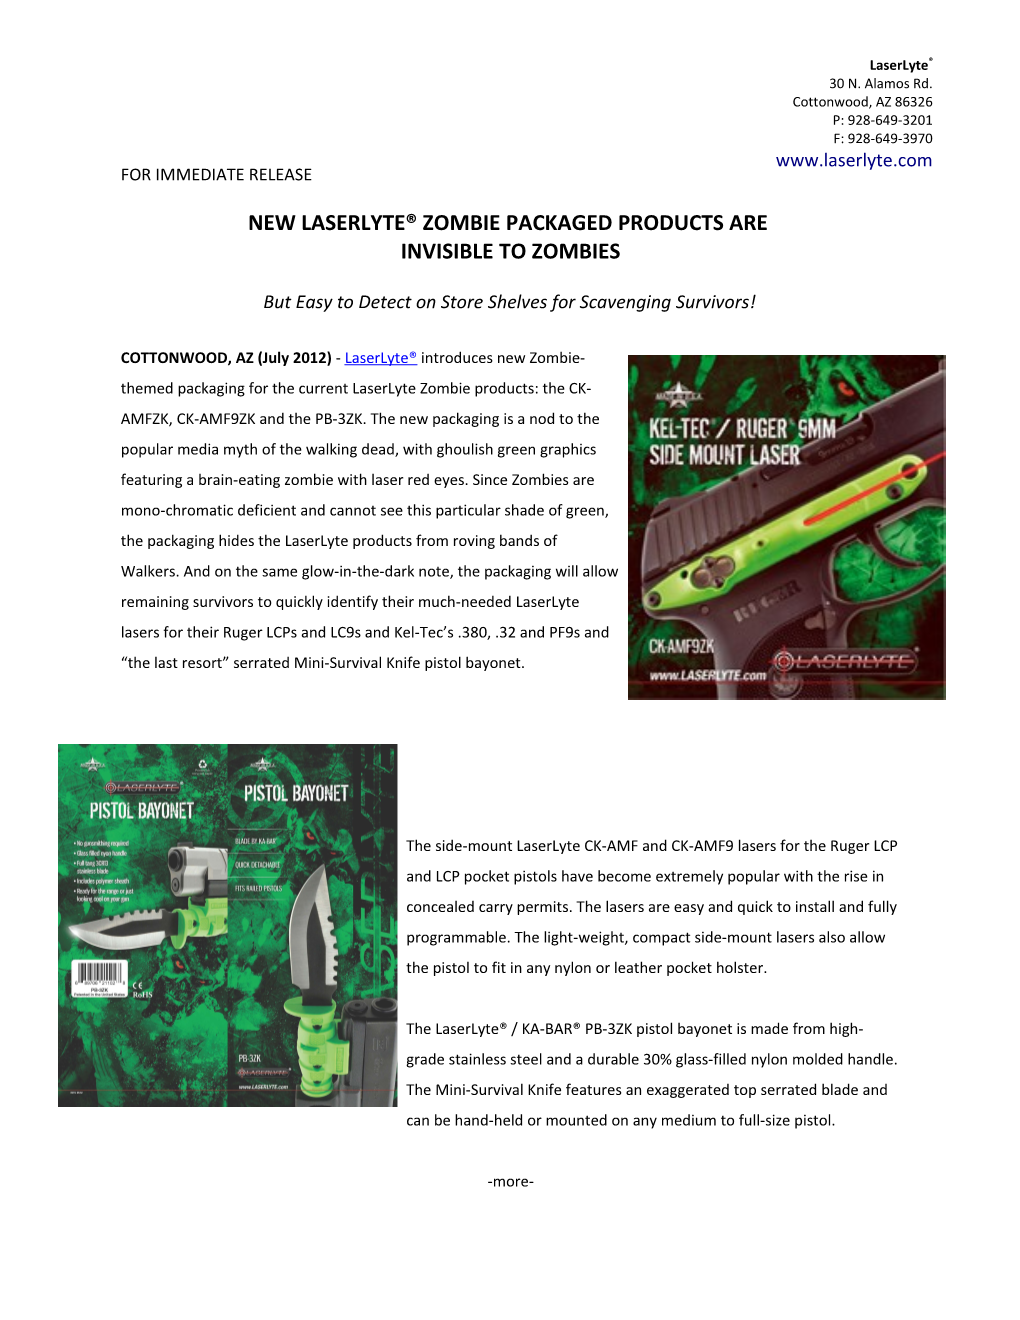 New Laserlyte Zombie Packaged Products Are